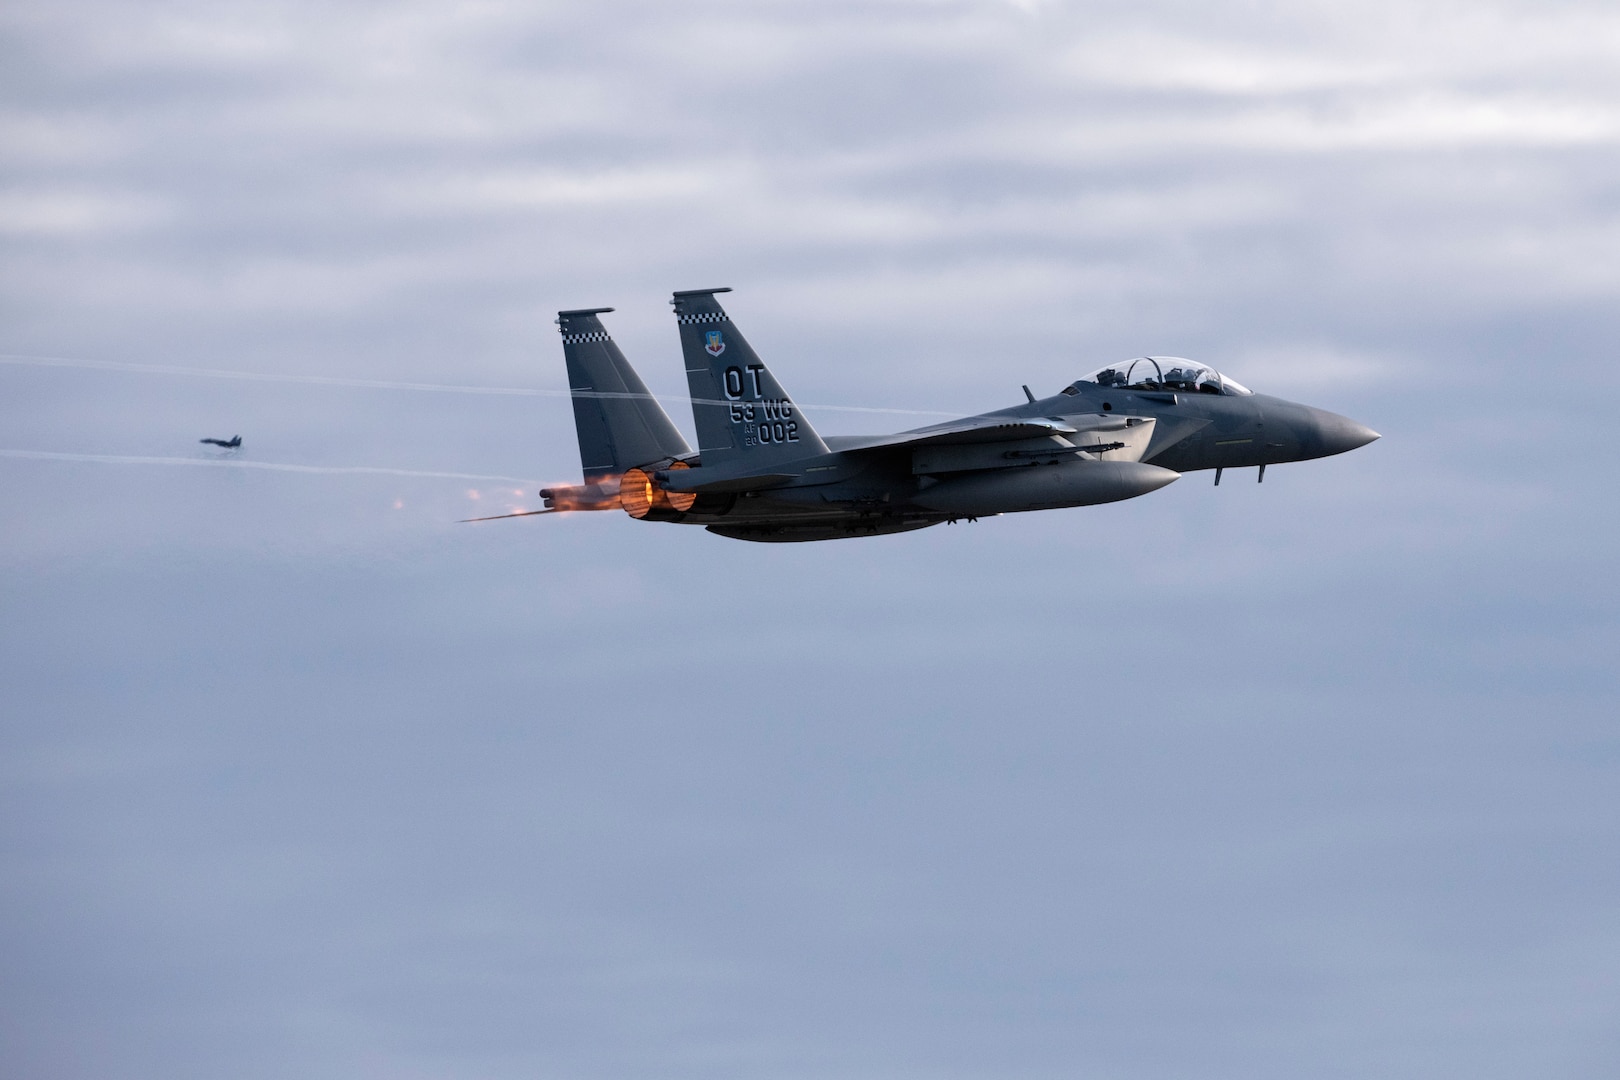 A U.S. Air Force F-15EX Eagle assigned to the 53rd Wing out of Eglin Air Force Base, Fla., takes off in support of Northern Edge 21 at Joint Base Elmendorf-Richardson, Alaska, May 12, 2021. Approximately 15,000 U.S. service members participated in a joint training exercise hosted by U.S. Pacific Air Forces May 3-14, 2021, on and above the Joint Pacific Alaska Range Complex, the Gulf of Alaska, and temporary maritime activities area.